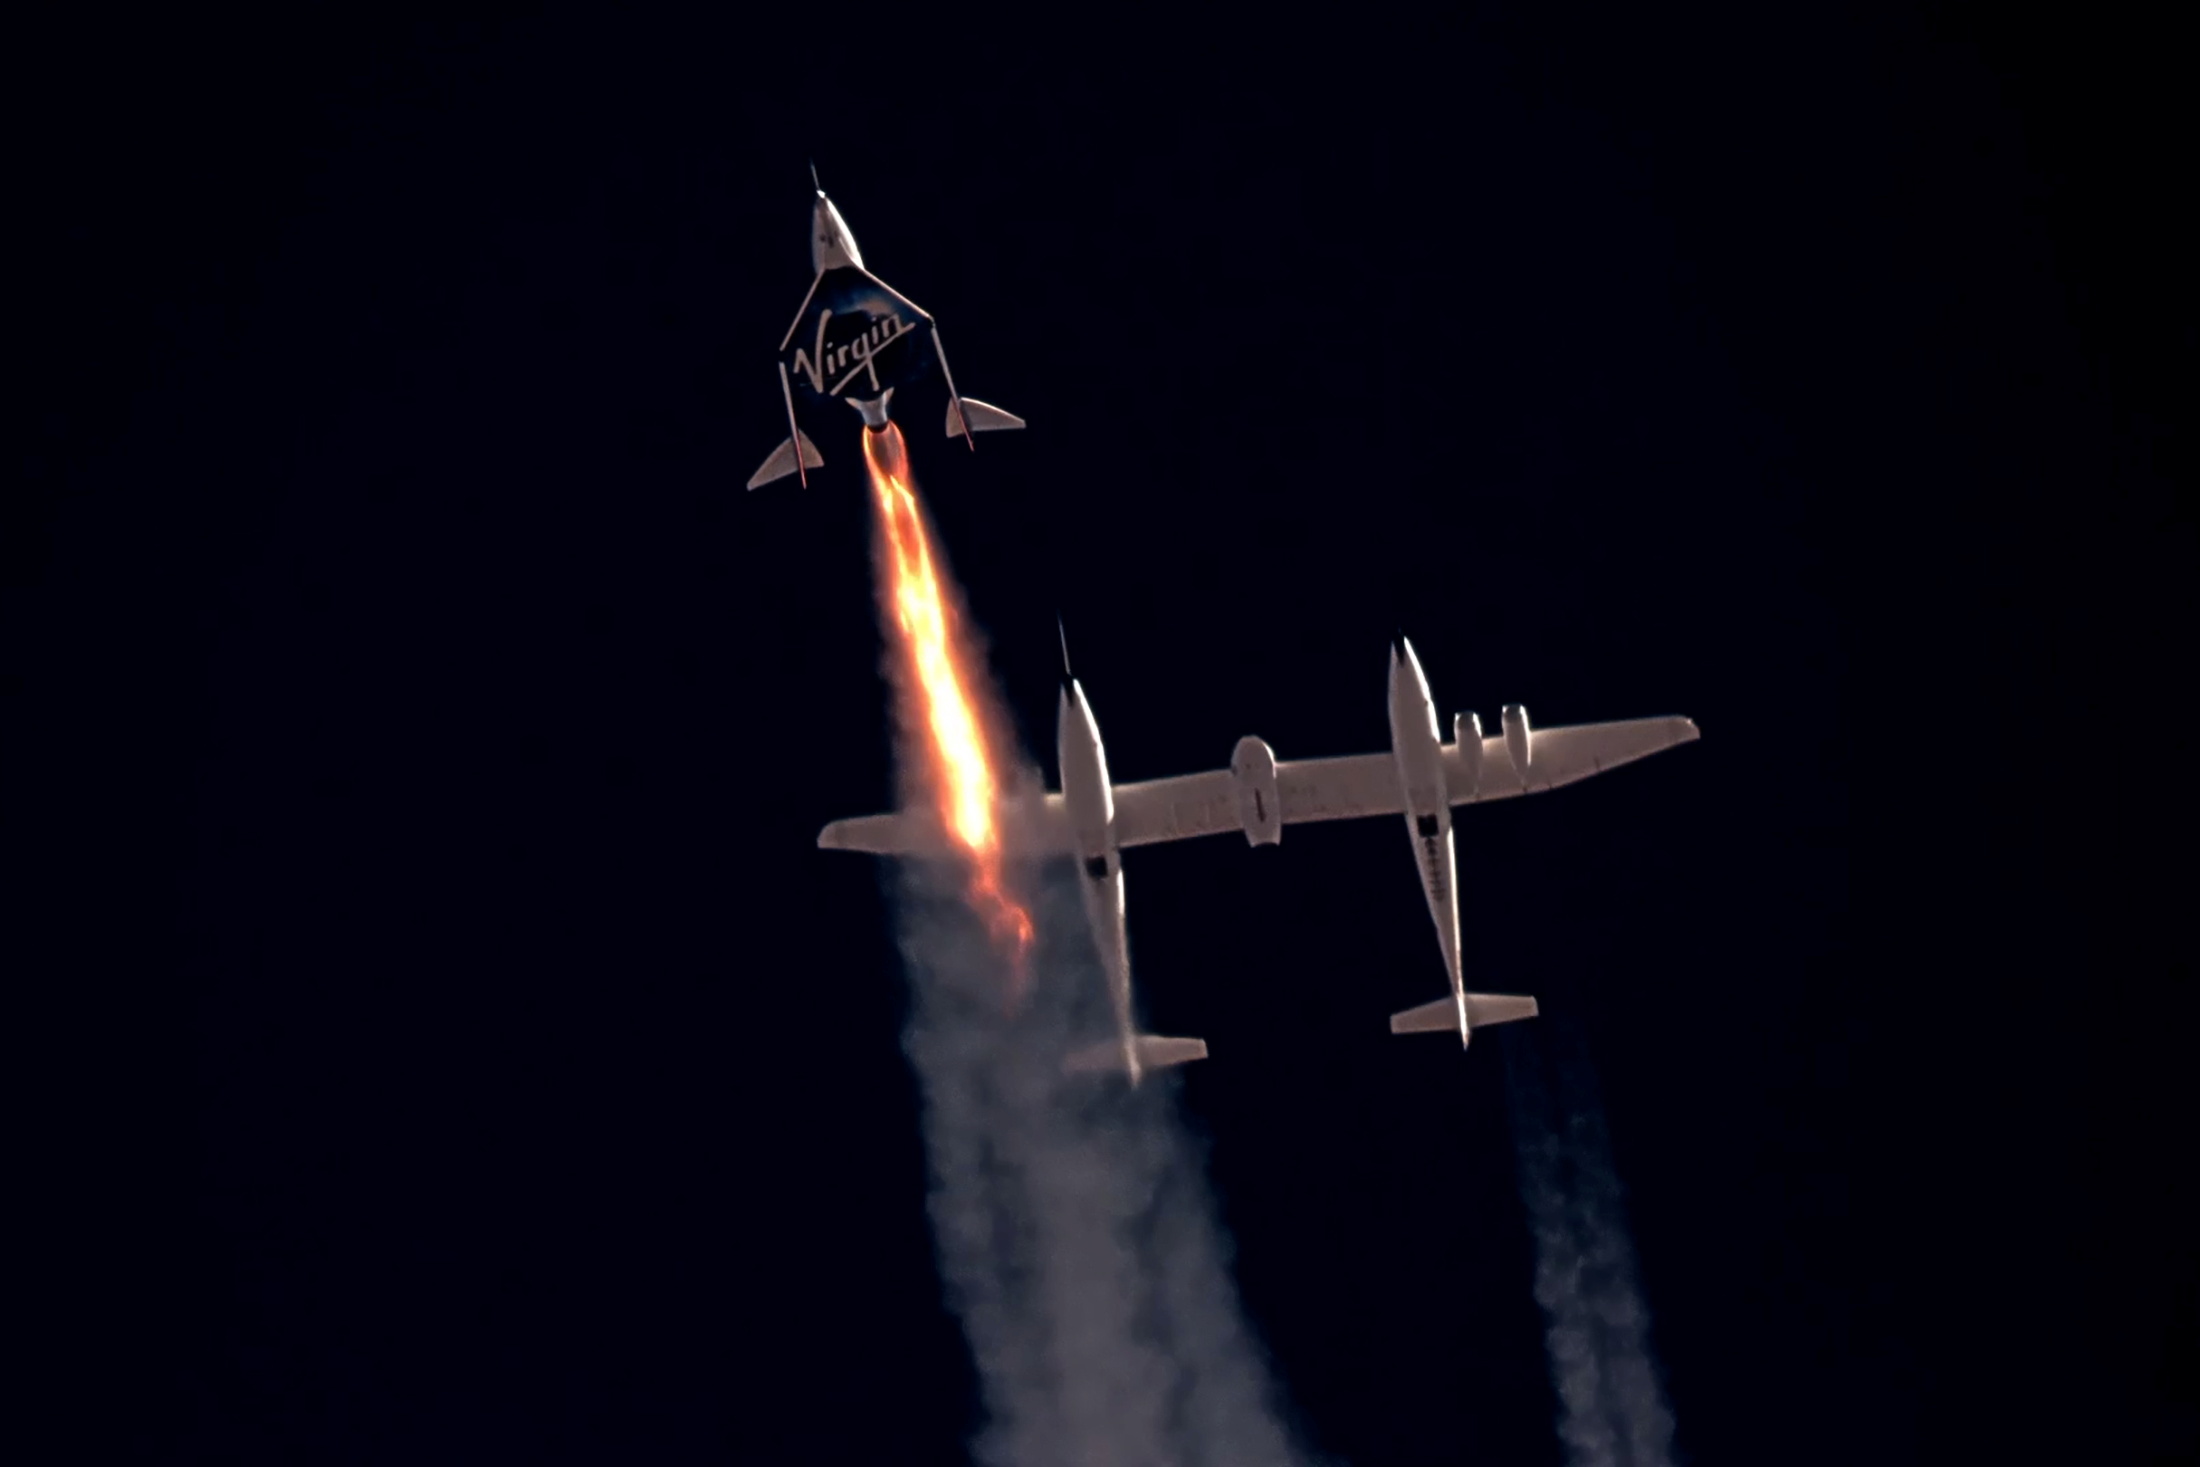 Virgin Galactic's passenger rocket plane VSS Unity, carrying Richard Branson and crew, begins its ascent to the edge of space above Spaceport America near Truth or Consequences, New Mexico, U.S. July 11, 2021 in a still image from video.    Virgin Galactic/Handout via REUTERS. 